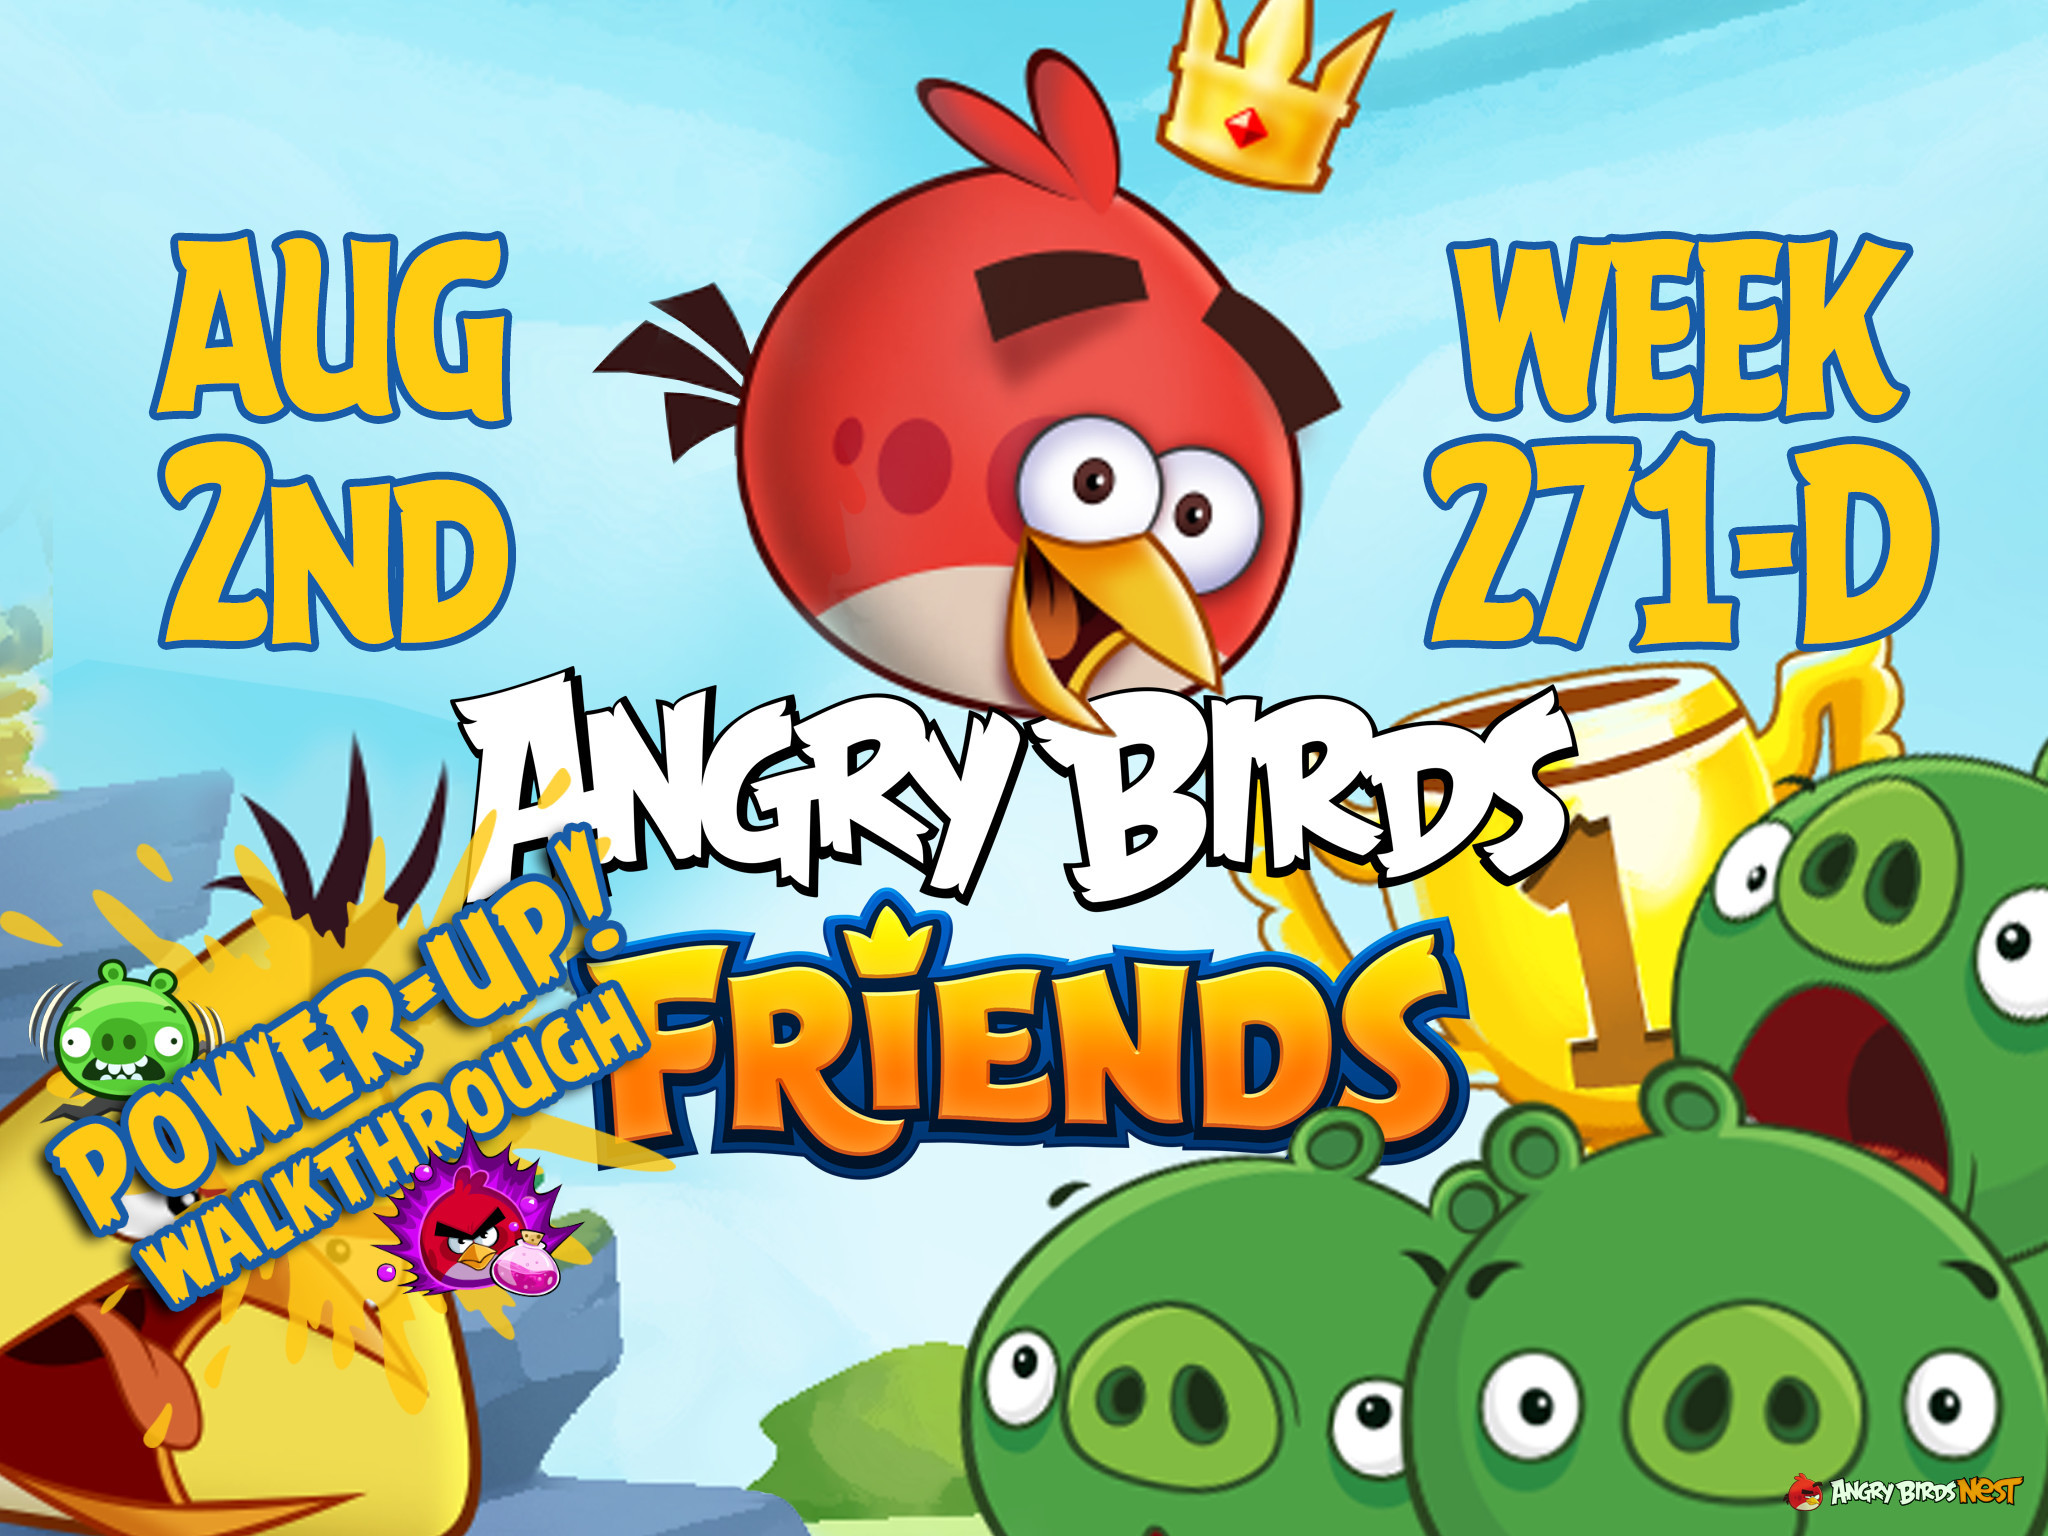 Angry Birds Friends Tournament Week 271-D Feature Image PU